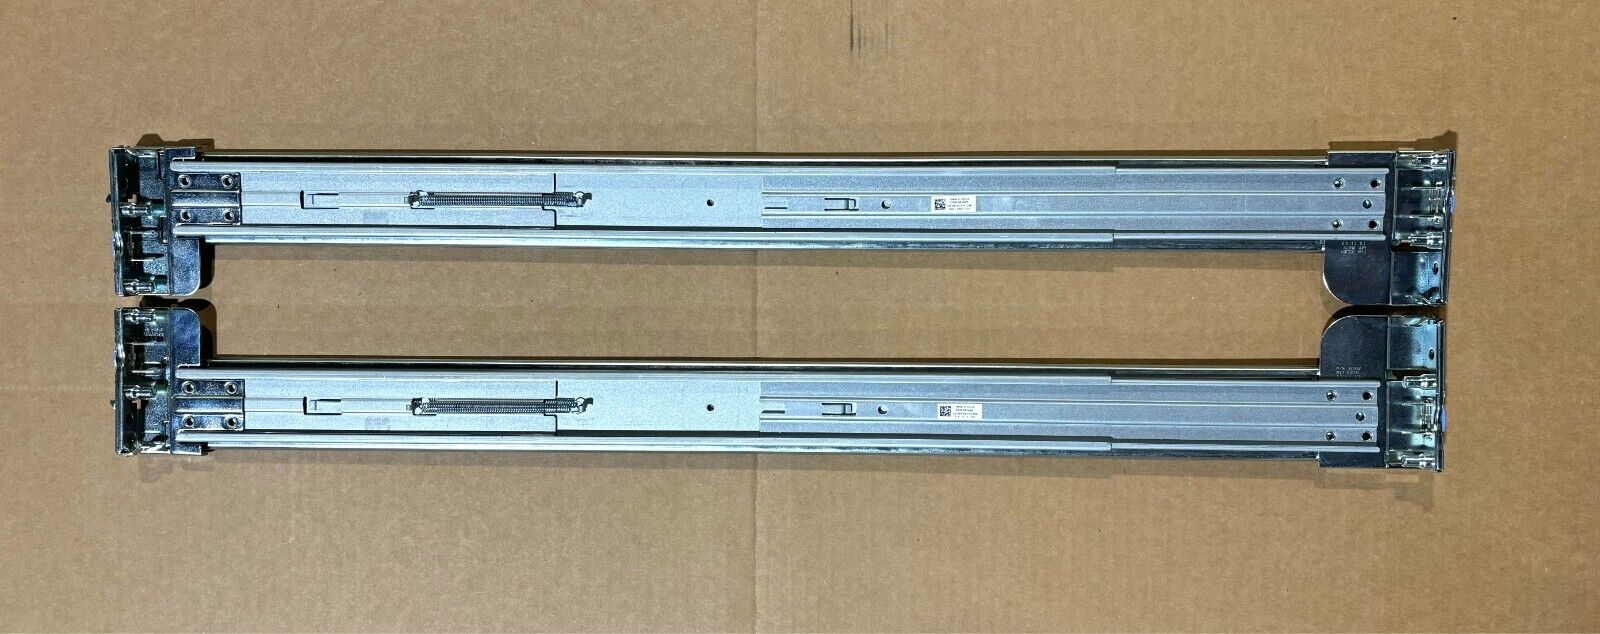 Dell PowerEdge Rail System Left/Right 0FYK4G, 061KCY  *Satisfaction Guaranteed*